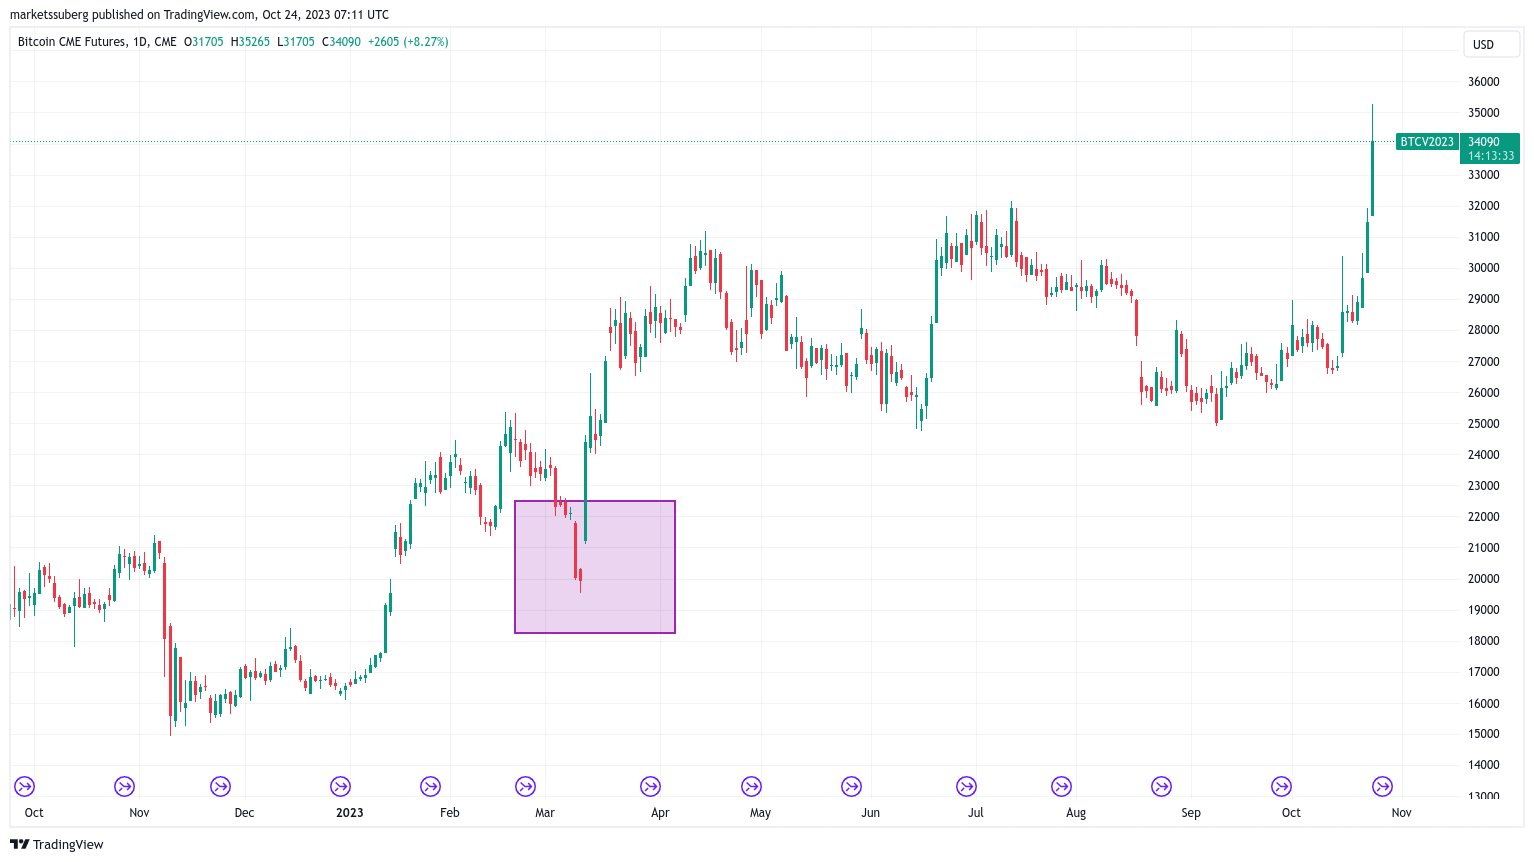 CME Bitcoin futures chart with gap highlighted. Source: TradingView